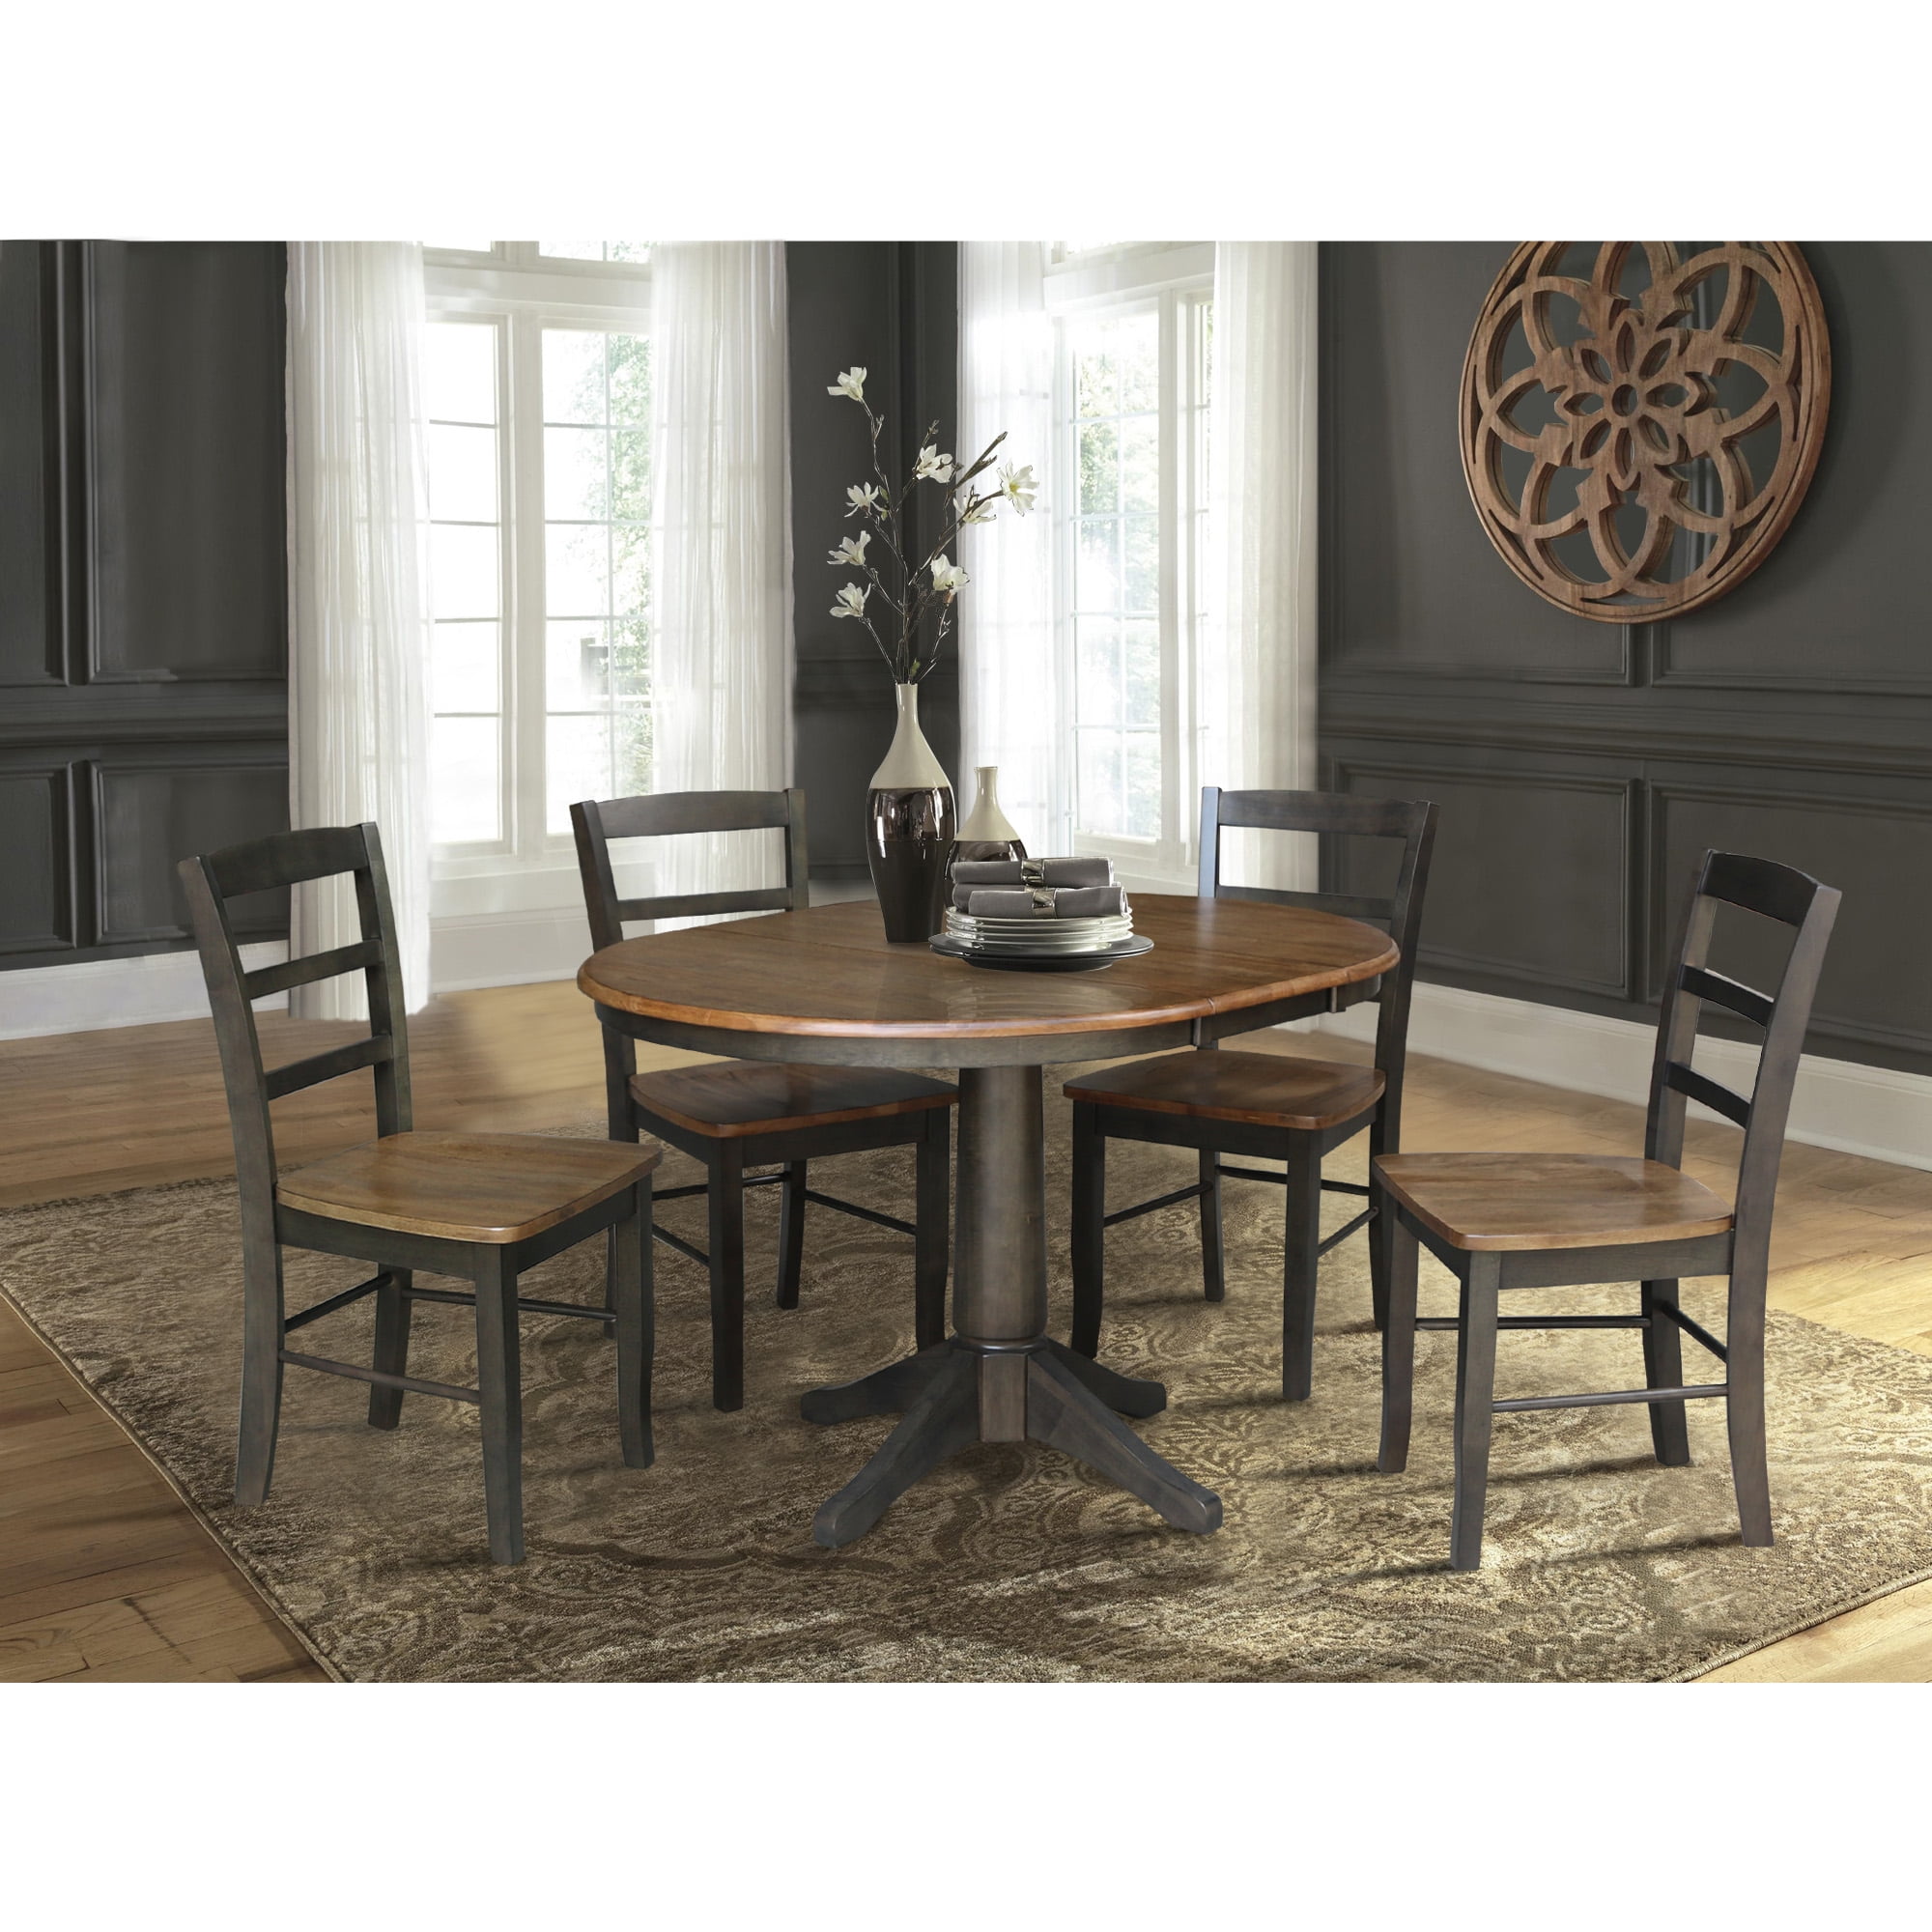 Round Extension Pedestal Table